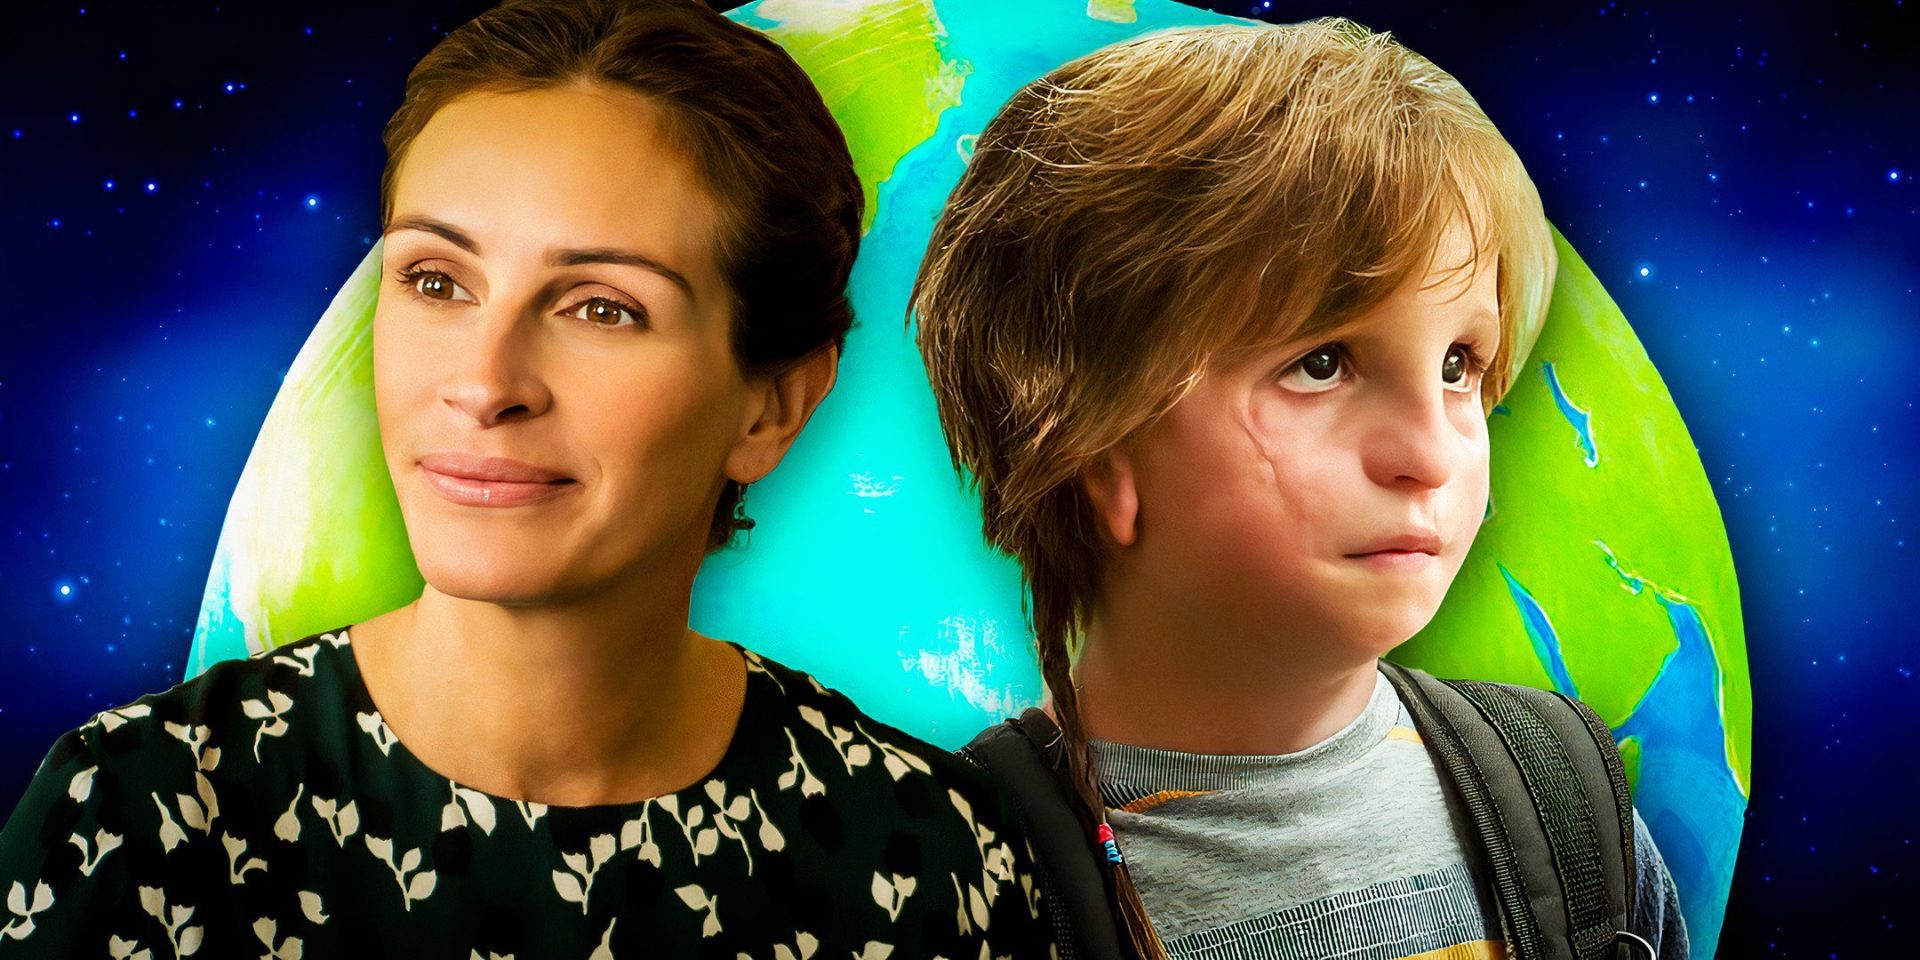 Julia Roberts’ family film with 86% Rotten Tomatoes enters Netflix’s US top 10